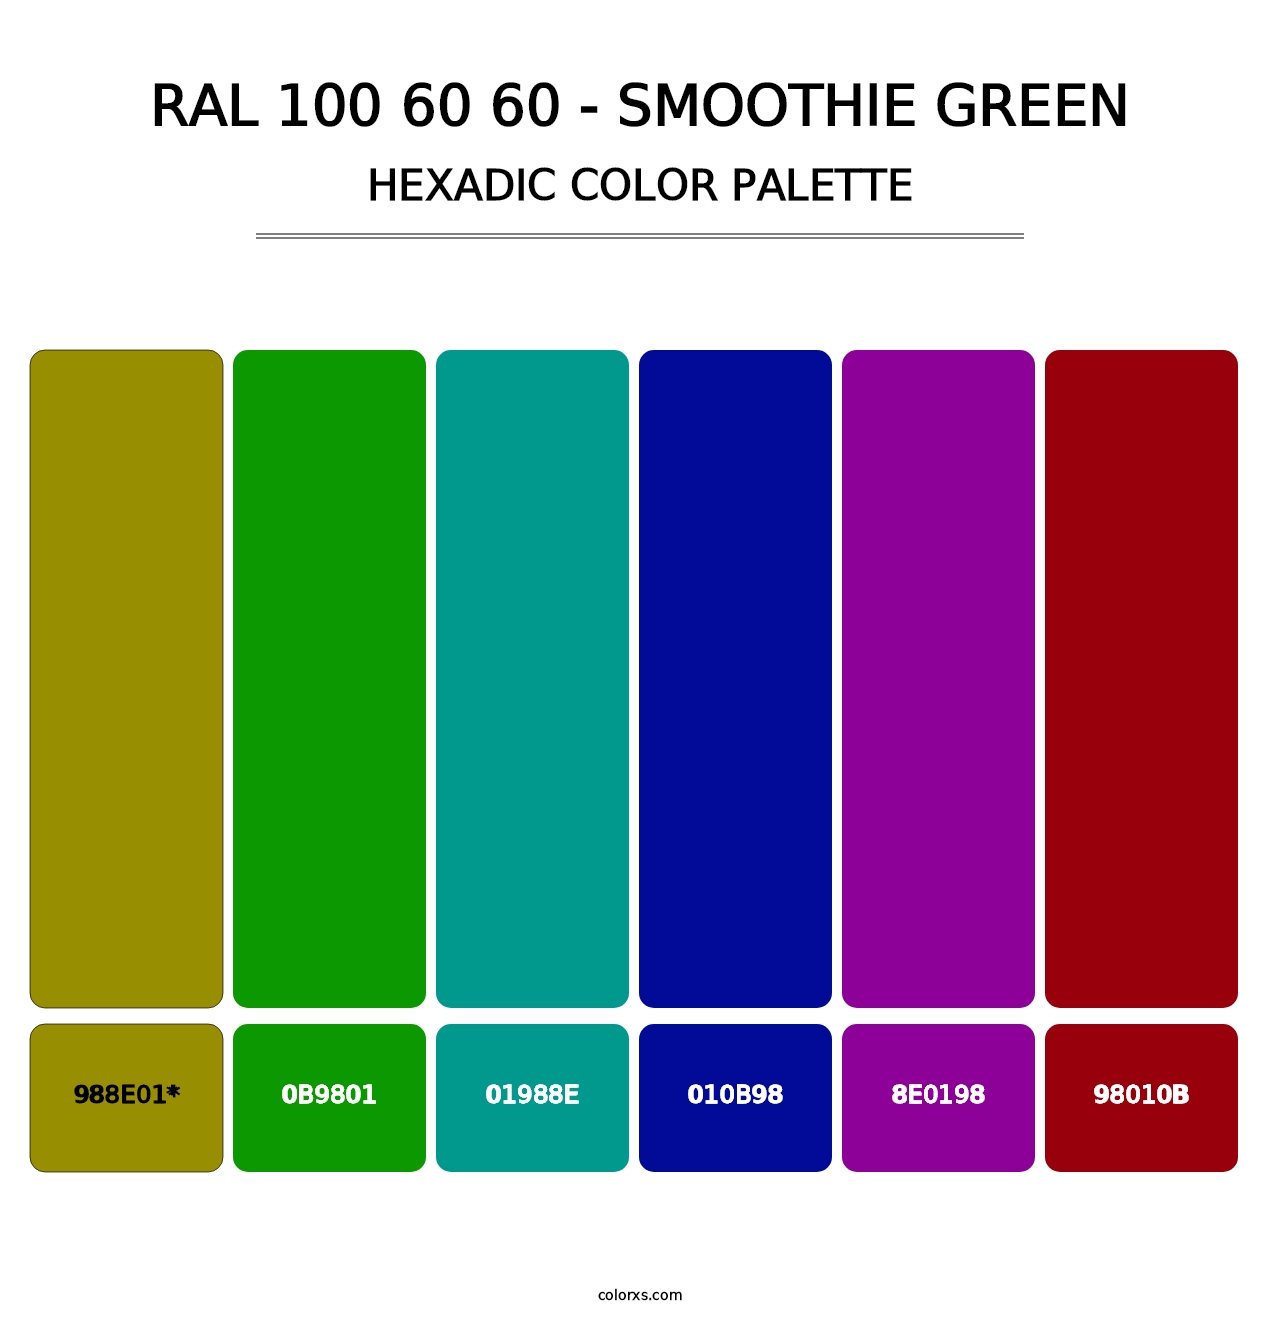 RAL 100 60 60 - Smoothie Green - Hexadic Color Palette